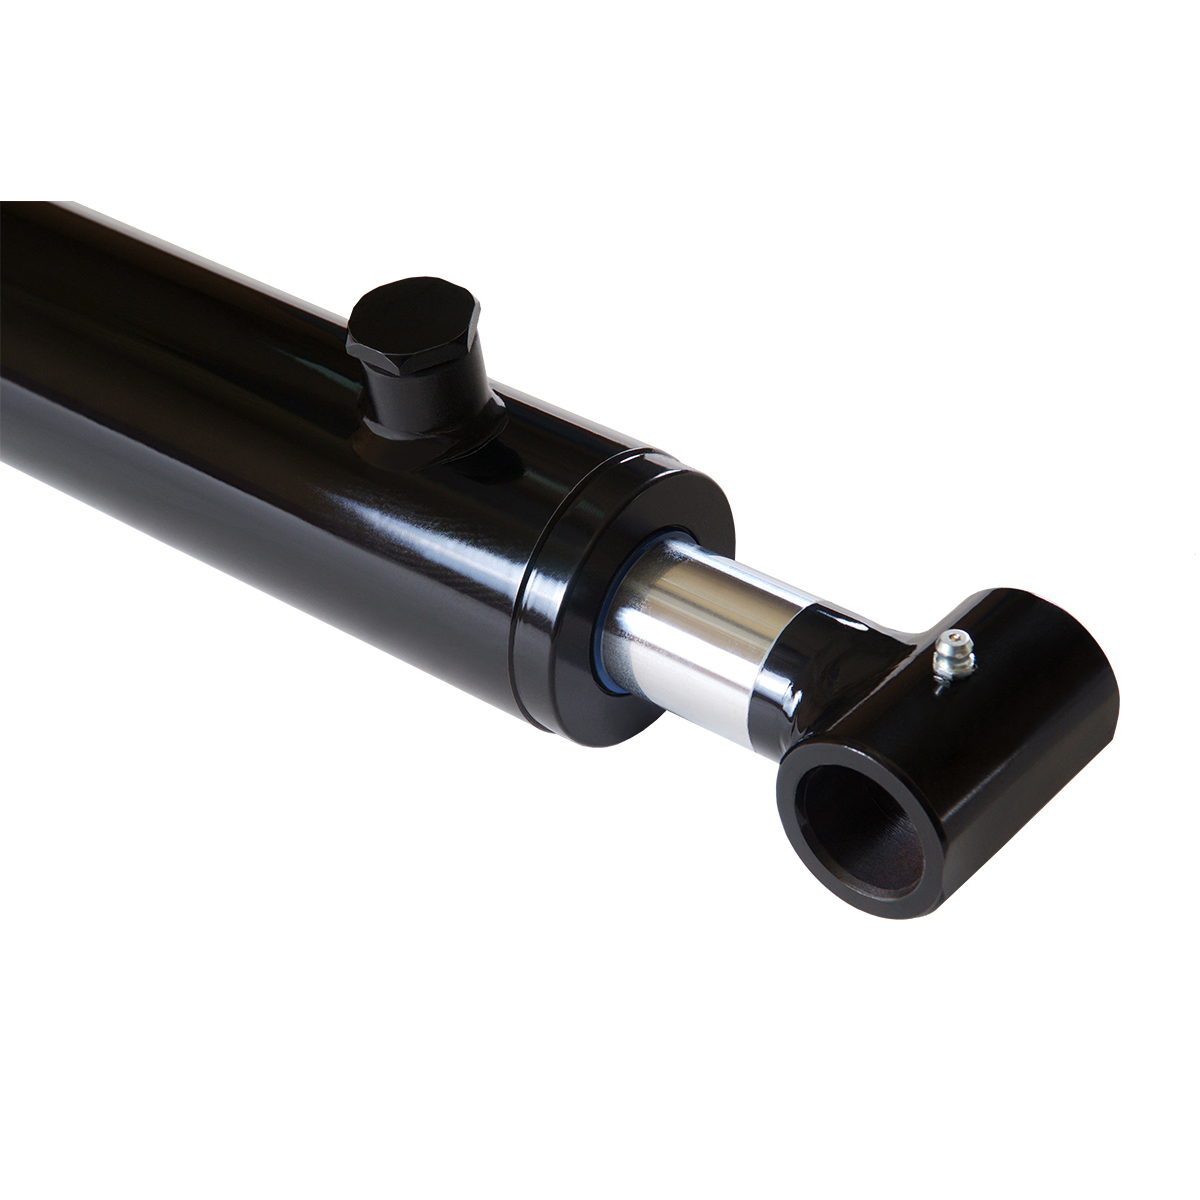 2 bore x 18 stroke hydraulic cylinder, welded cross tube double acting cylinder | Magister Hydraulics